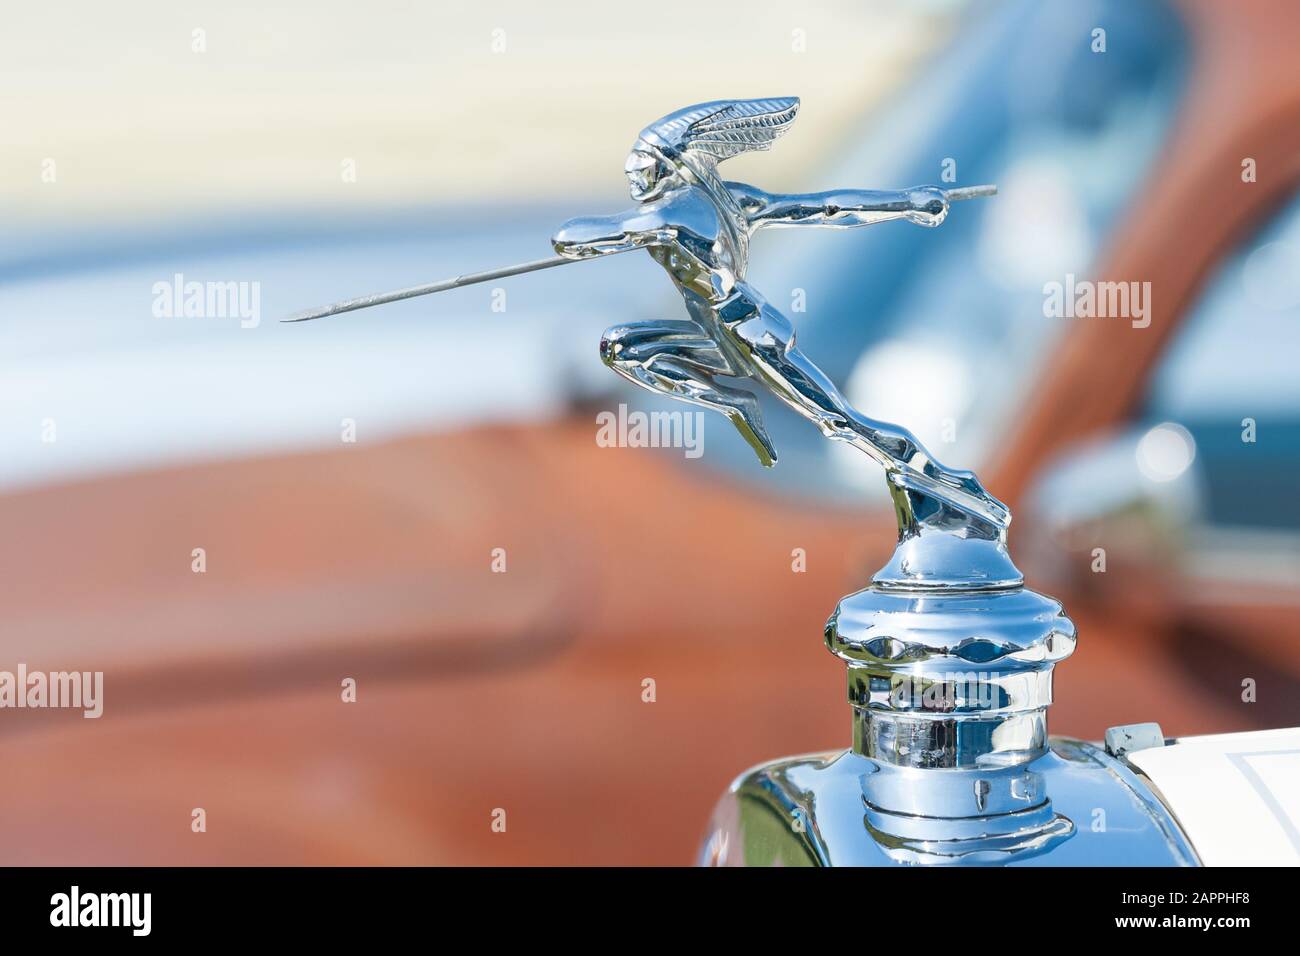 Native American hood ornament on a vintage Buick automobile in Rushmoor, Uk on April 19, 2019 Stock Photo